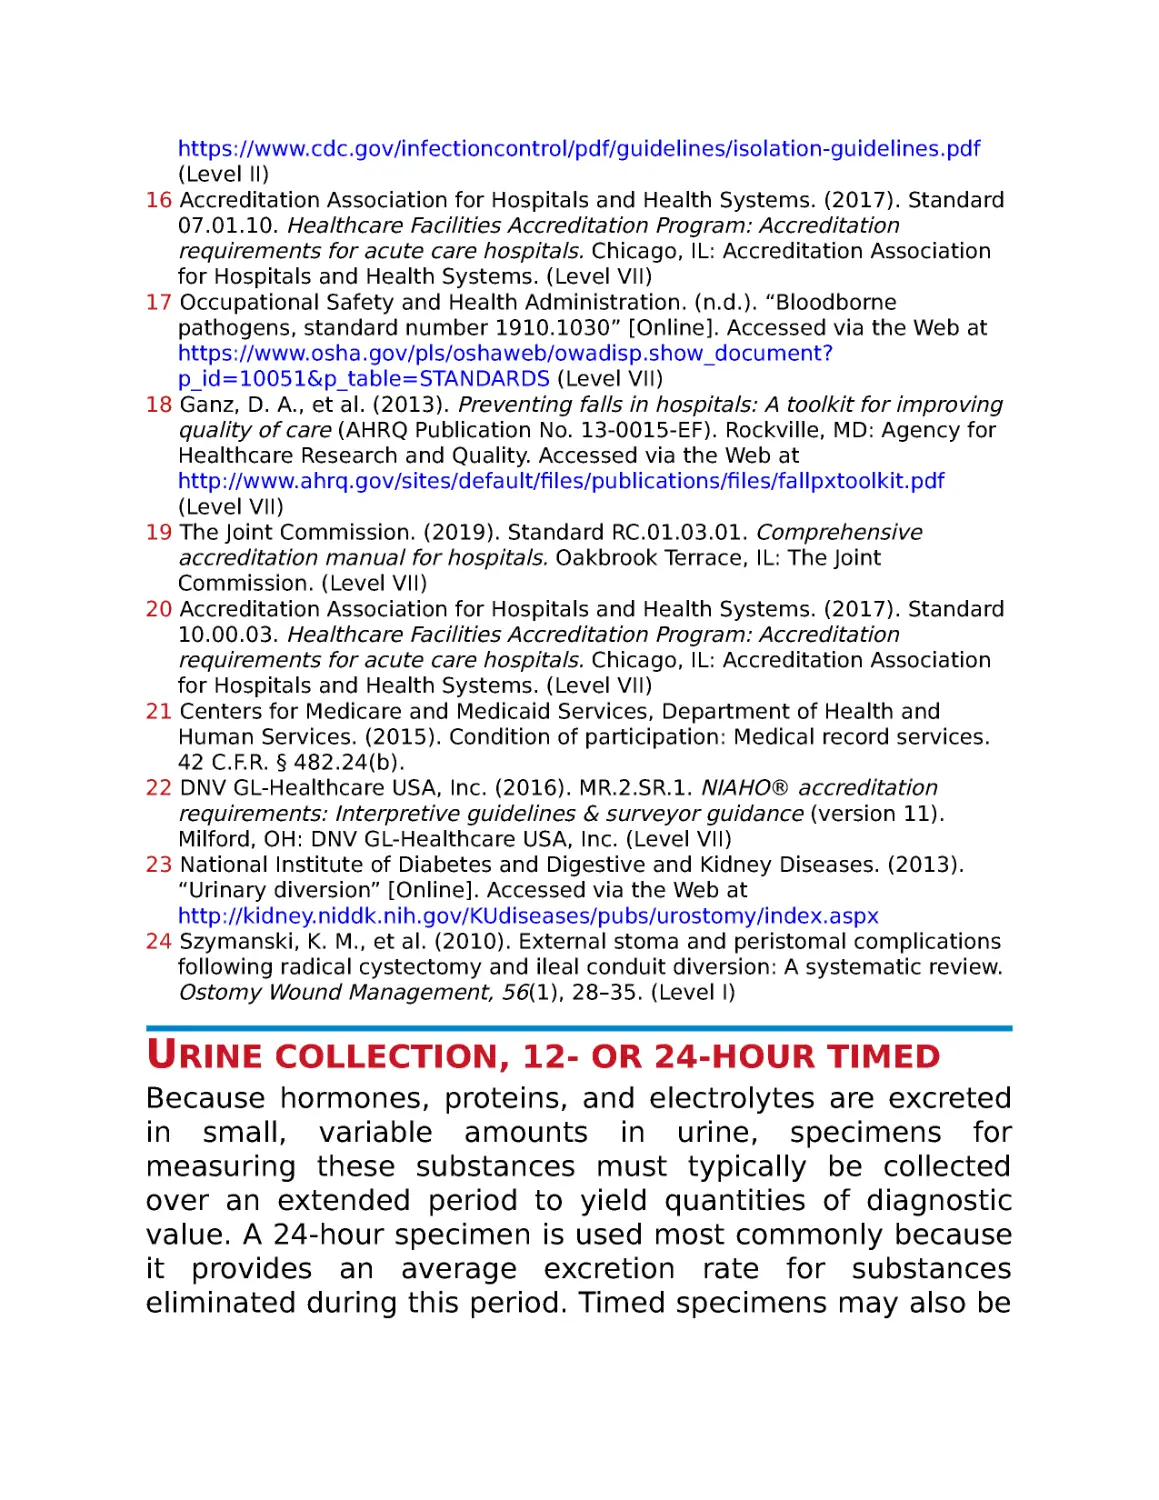 Urine collection, 12- or 24-hour timed